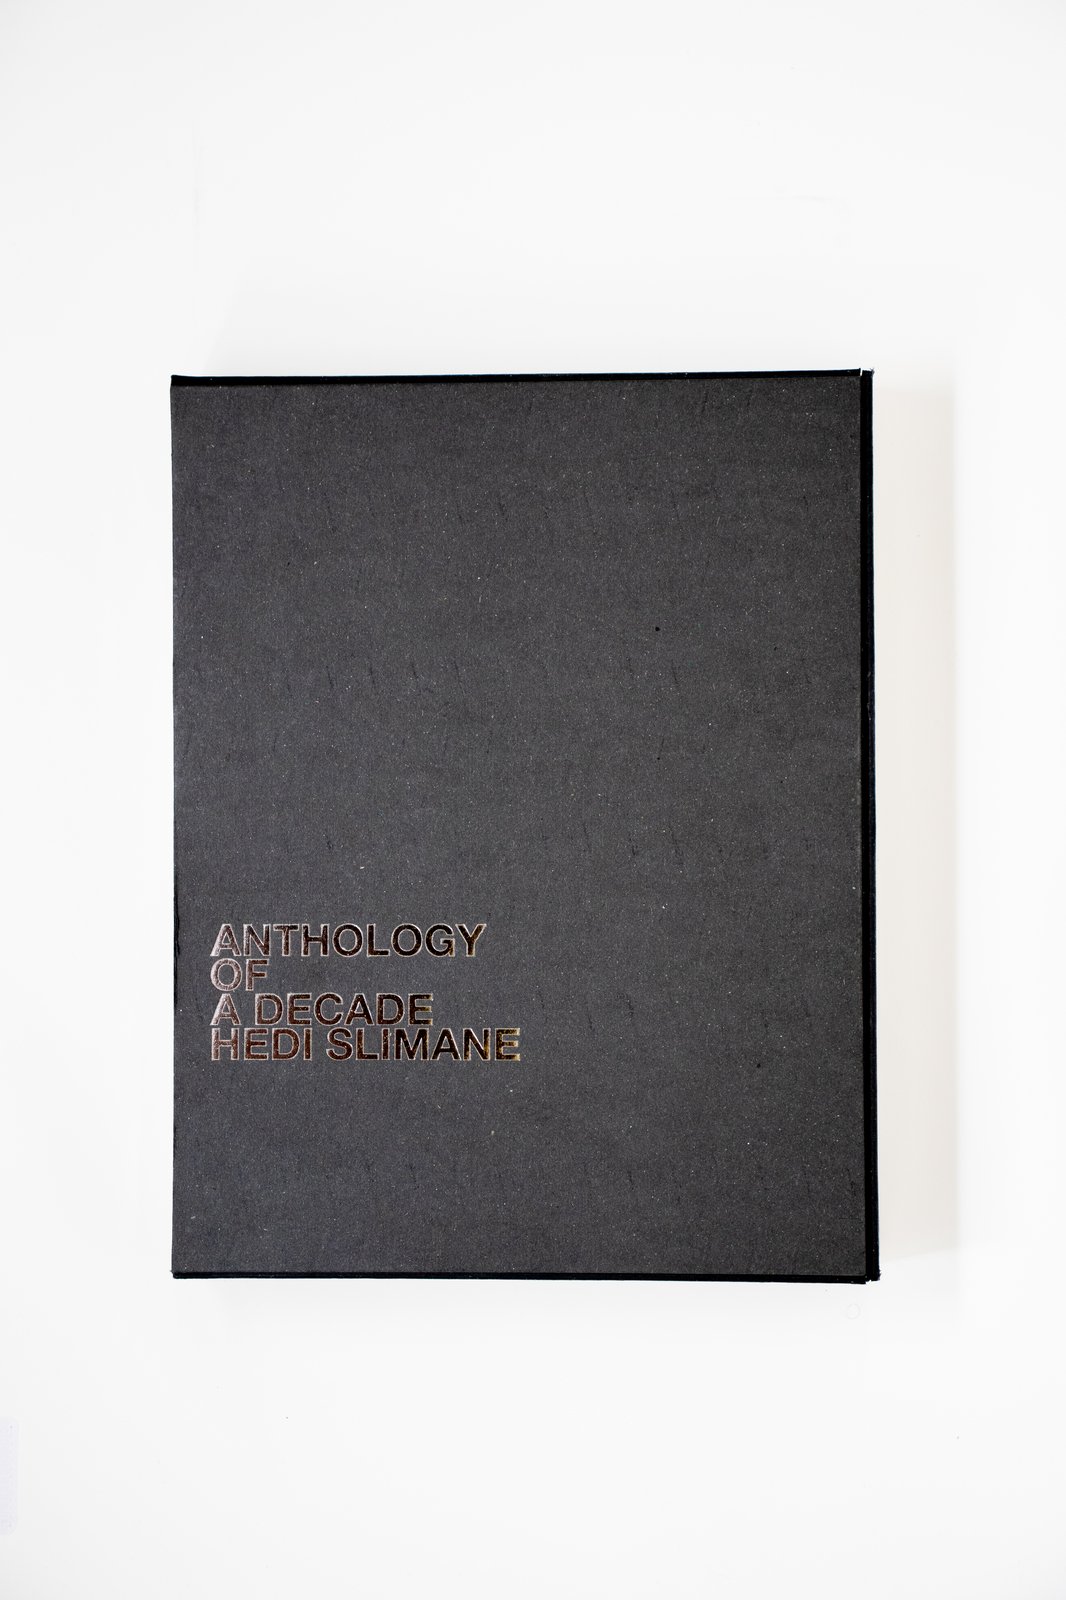 Hedi Slimane - Anthology of a Decade | Almine Rech Editions